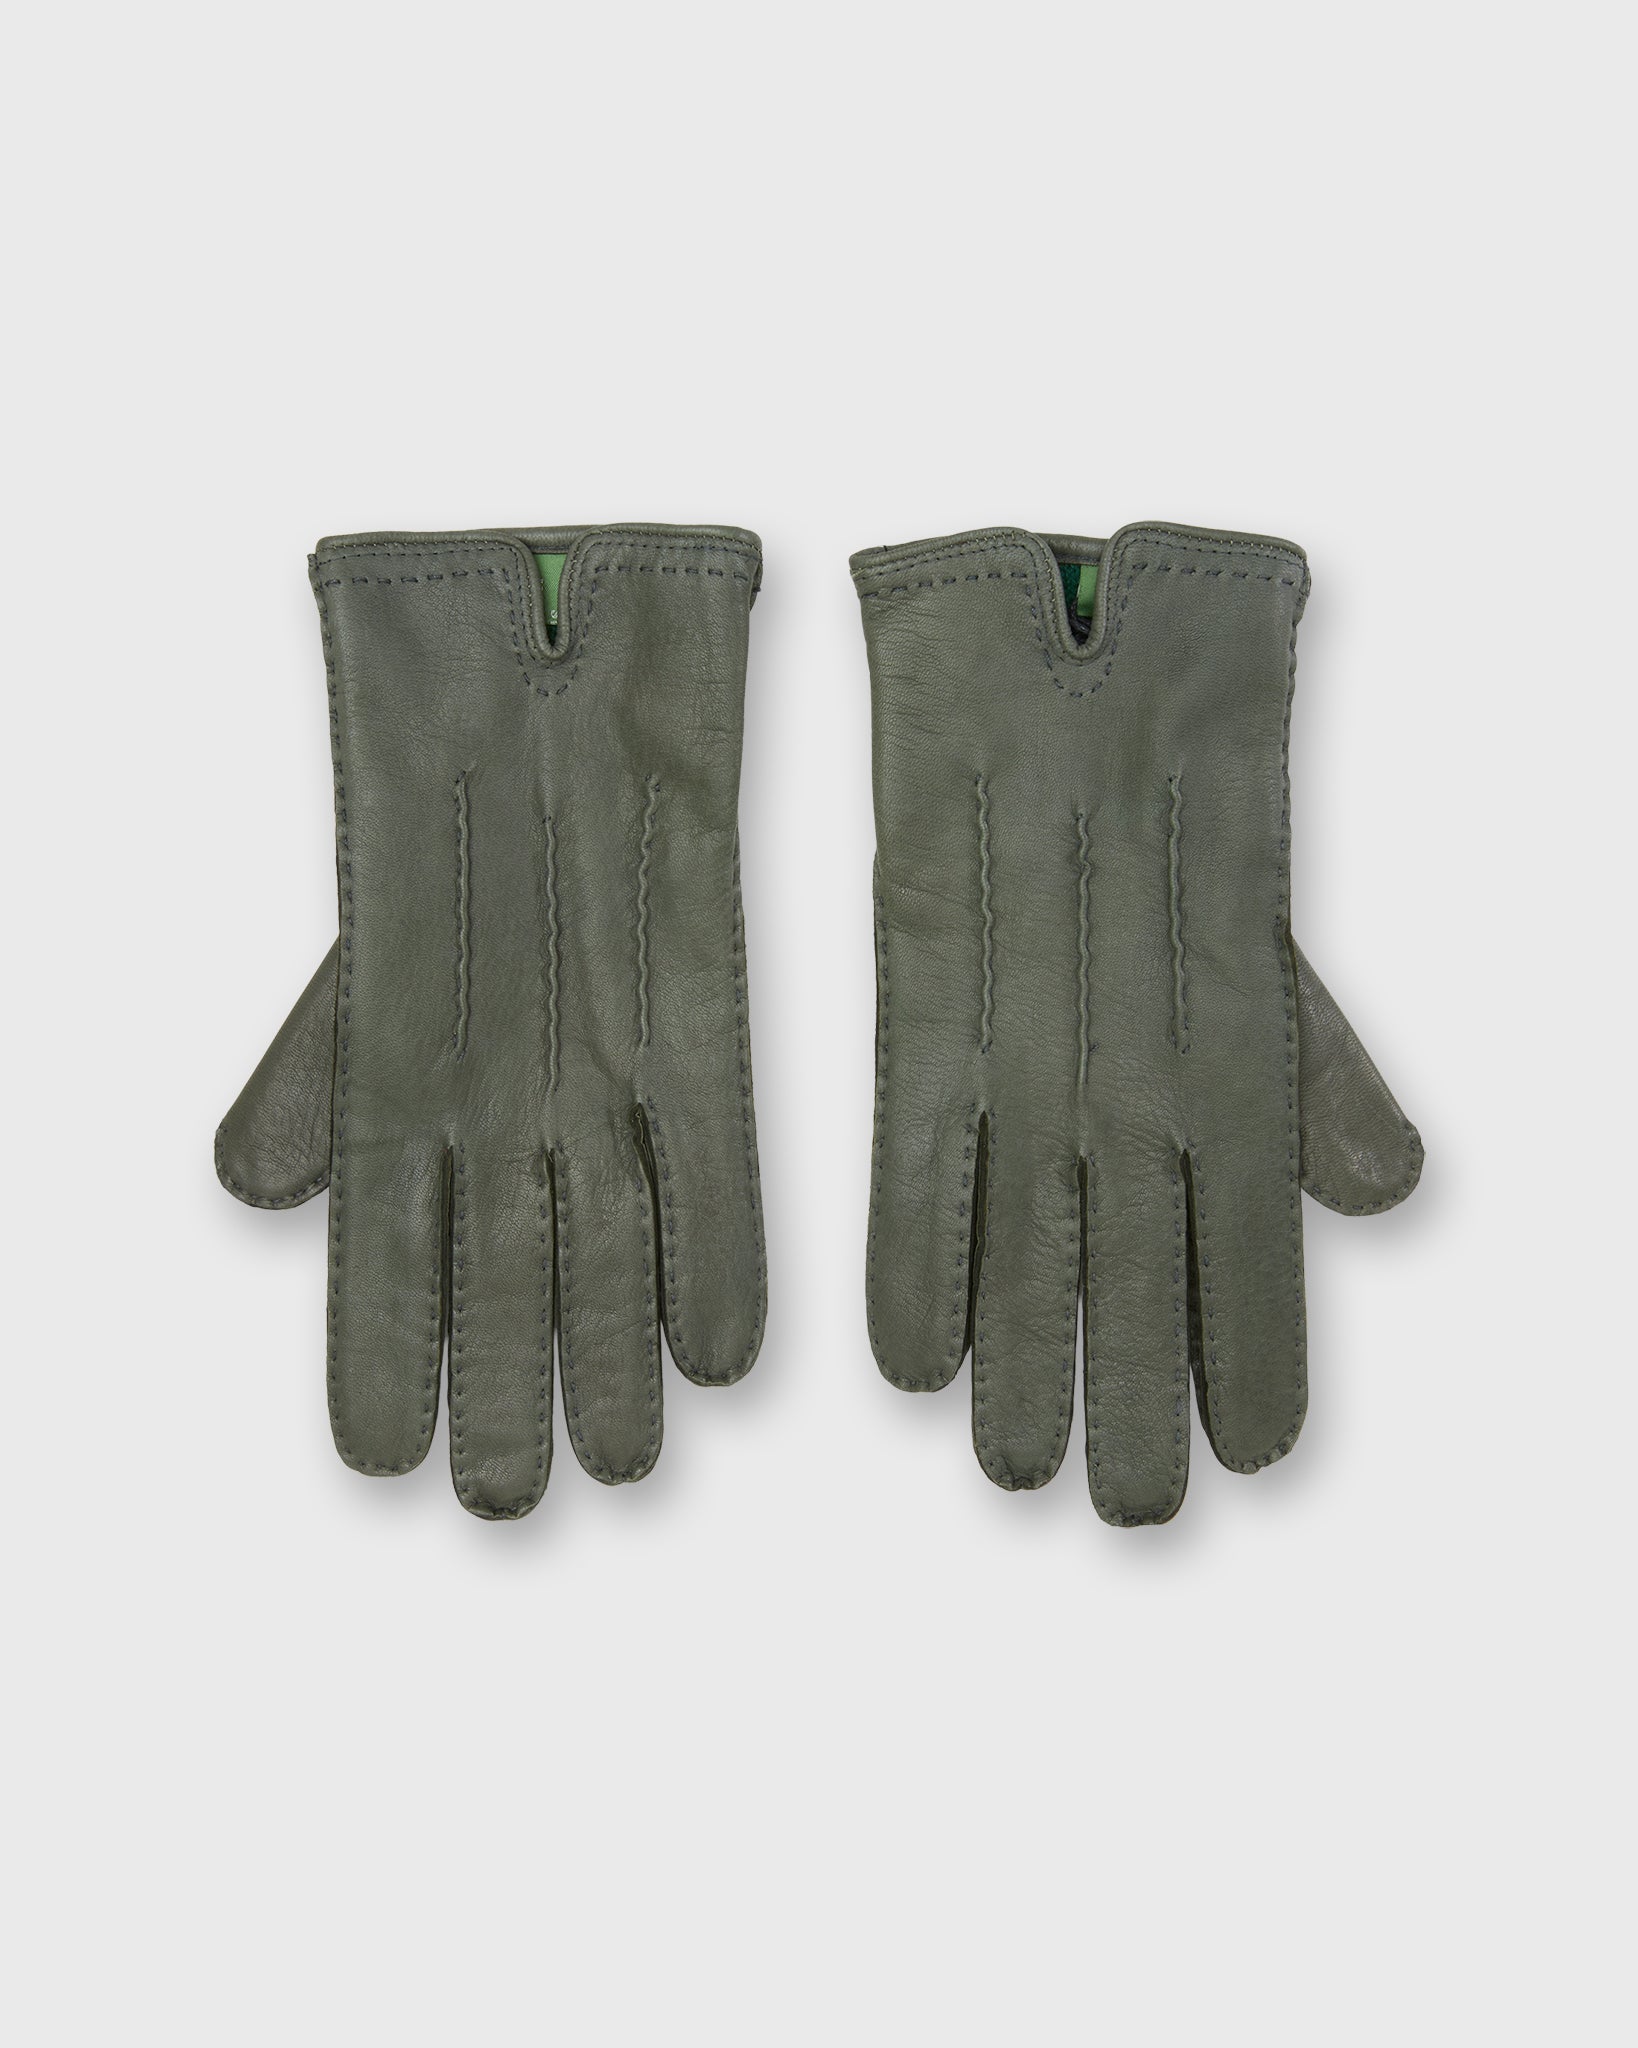 Hand-Stitched Cashmere-Lined Gloves in Olive Deerskin